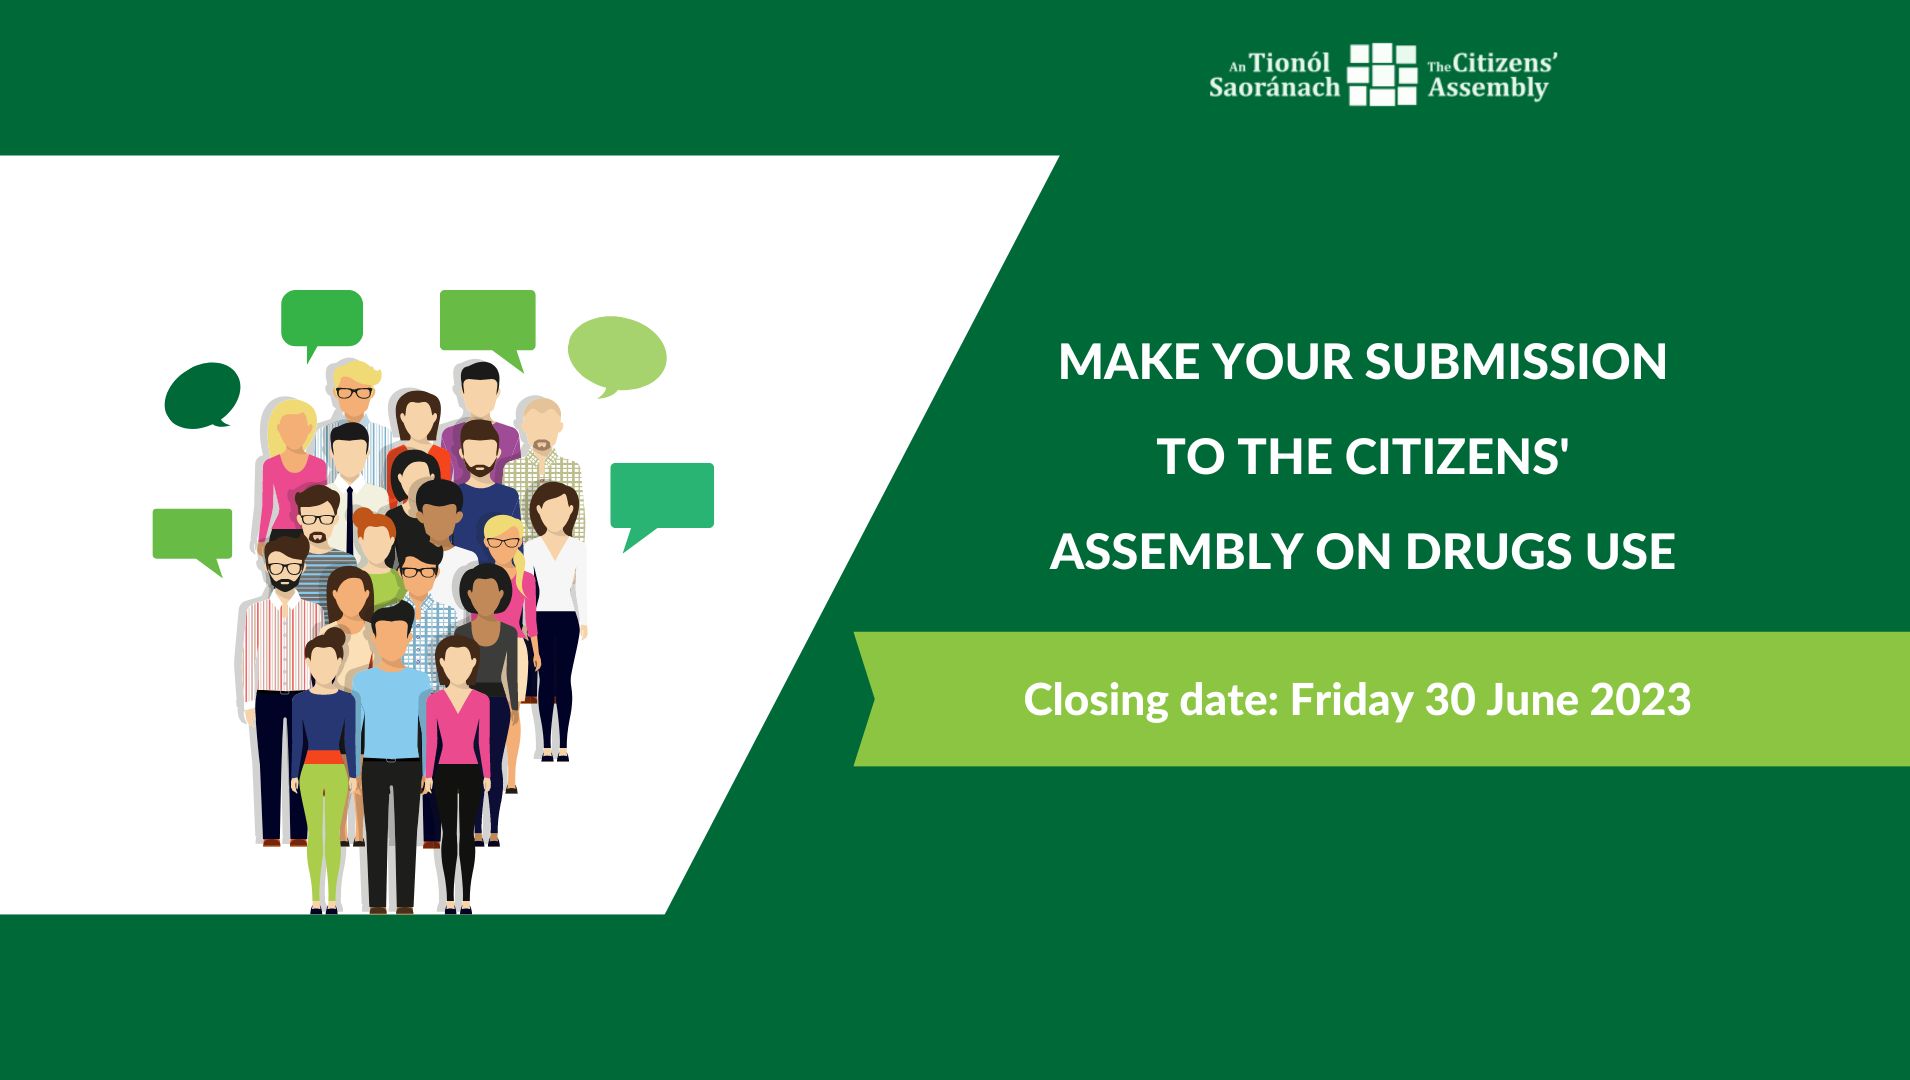 Over 400 submissions made to date to Citizens’ Assembly on Drugs Use